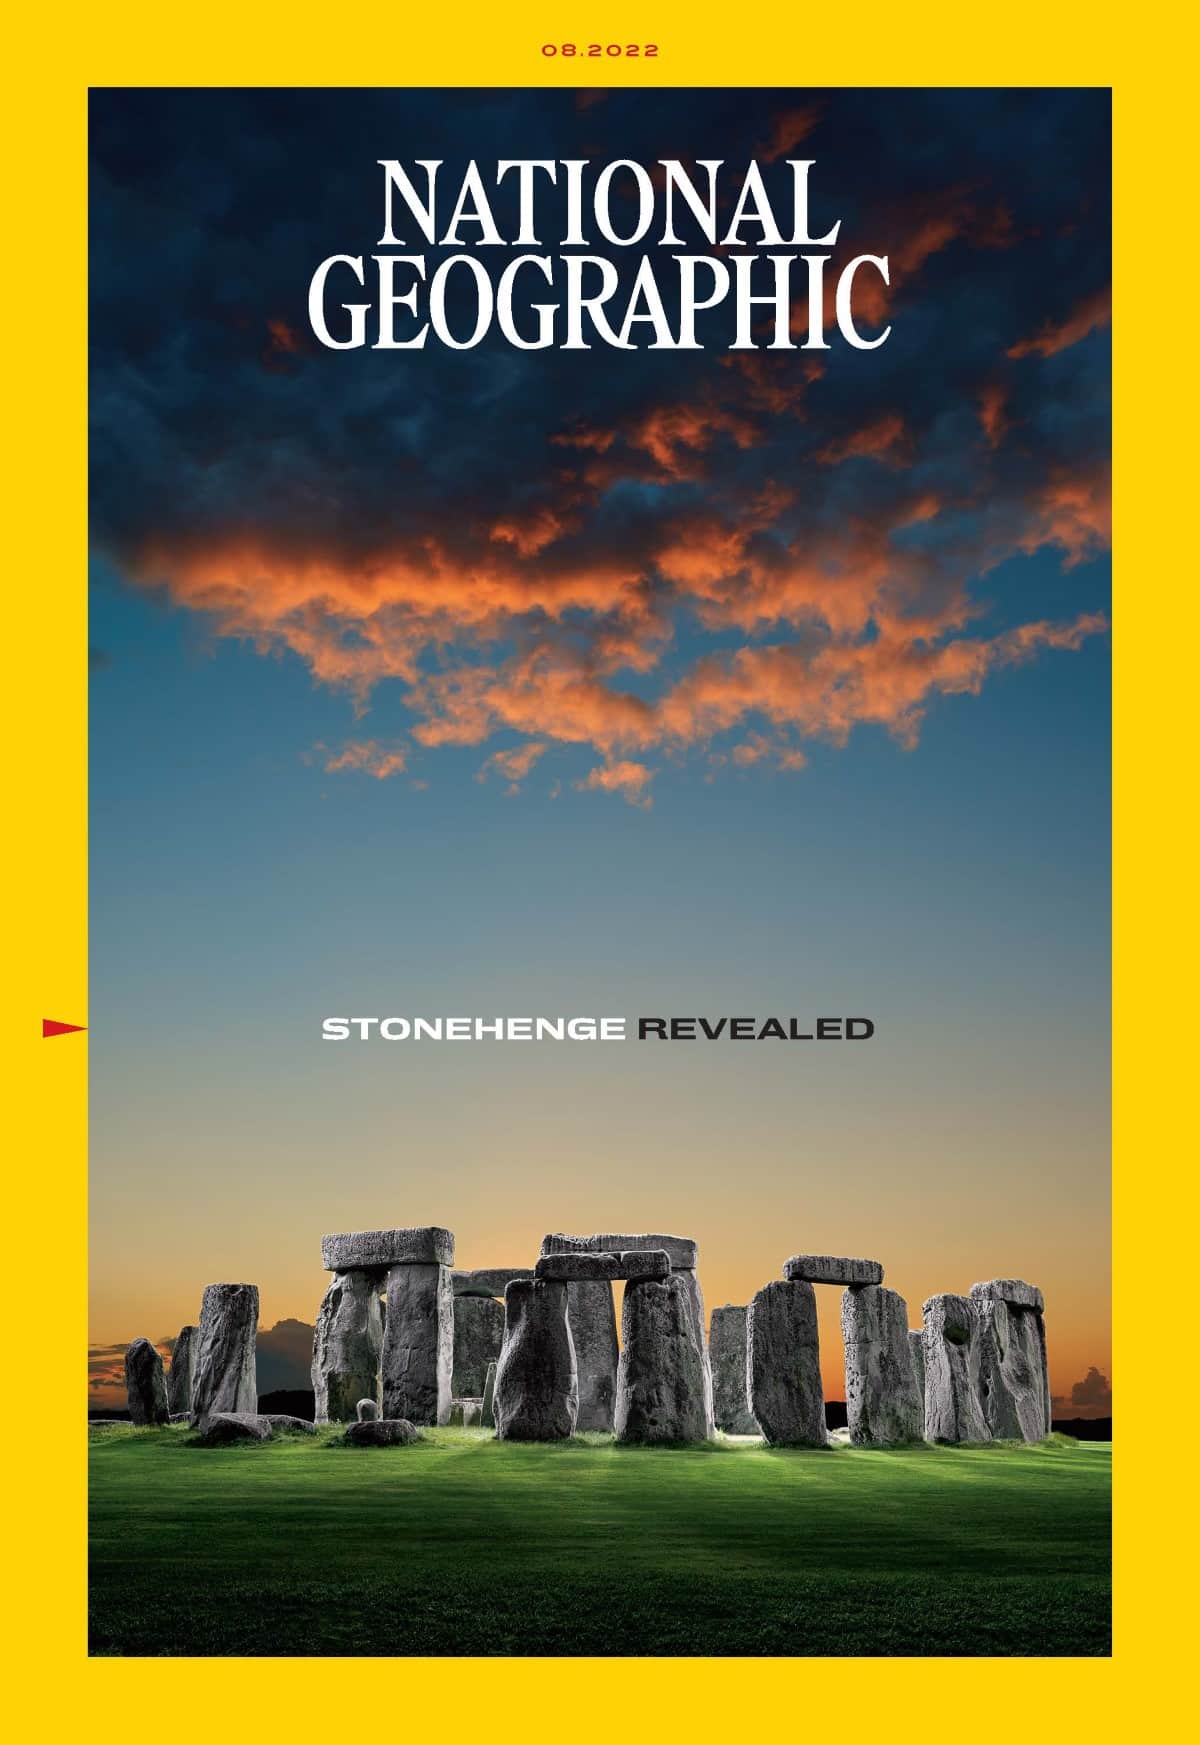 Stonehenge National Geographic Cover by Reuben Wu